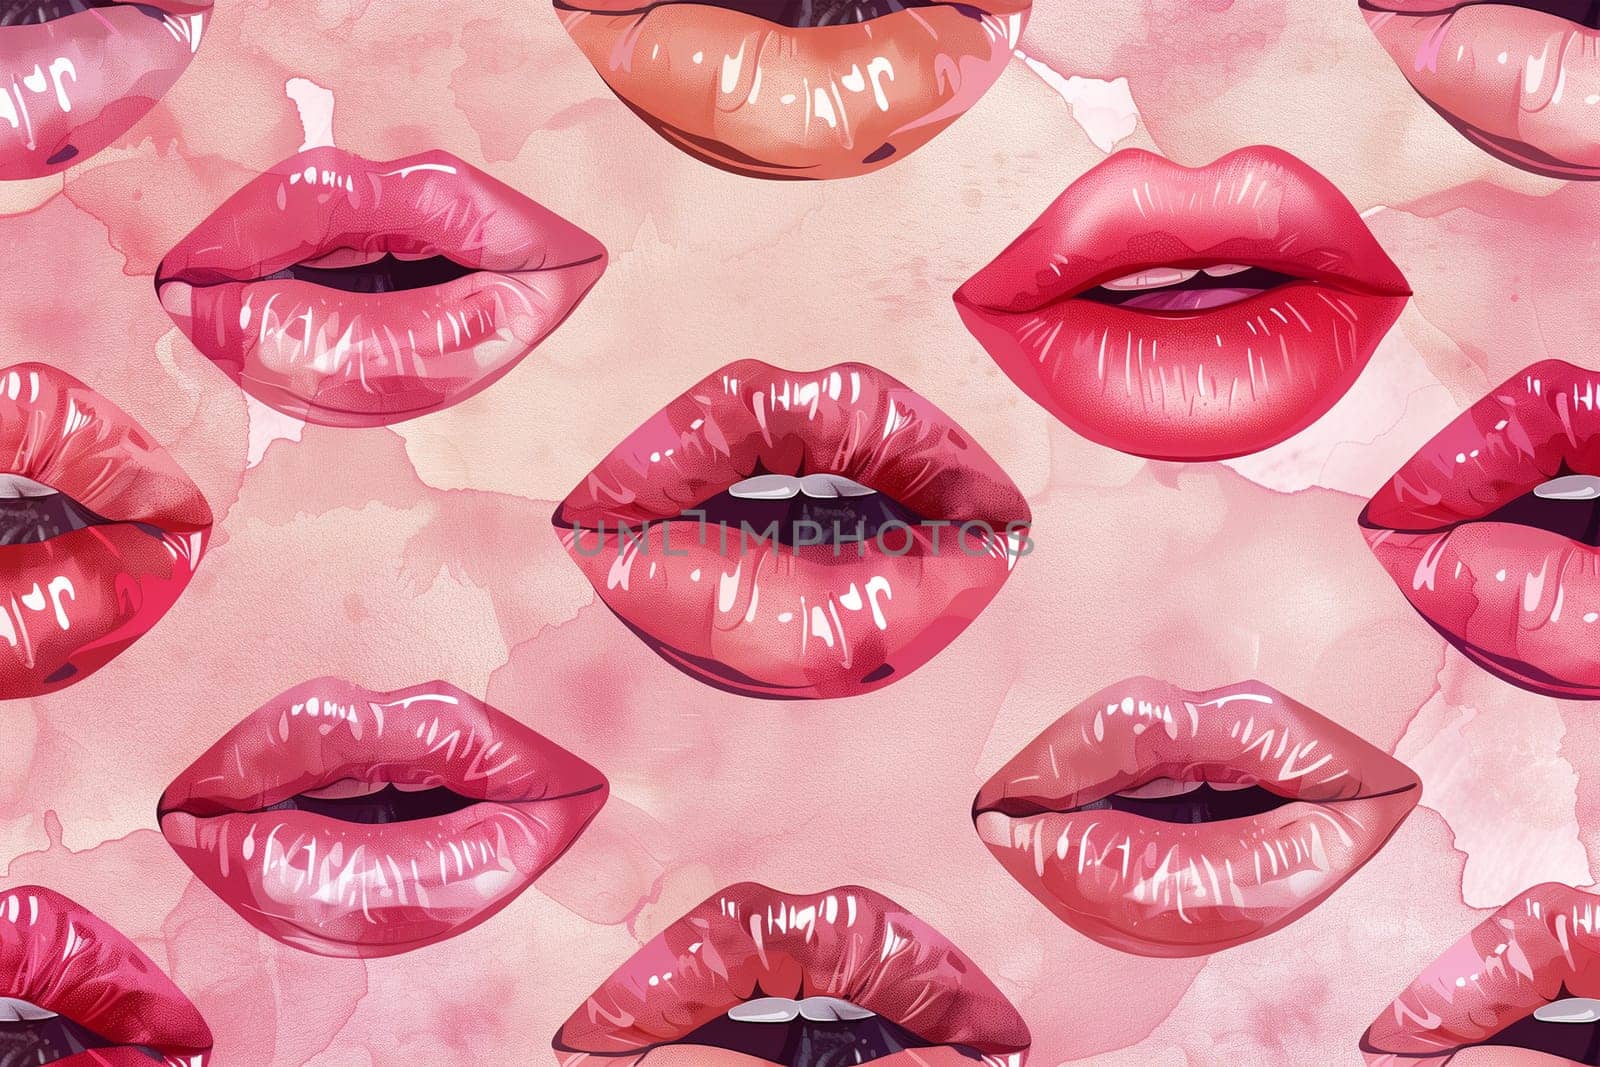 Multiple pink and red lips placed closely together on a pink background, creating a vibrant and colorful visual.